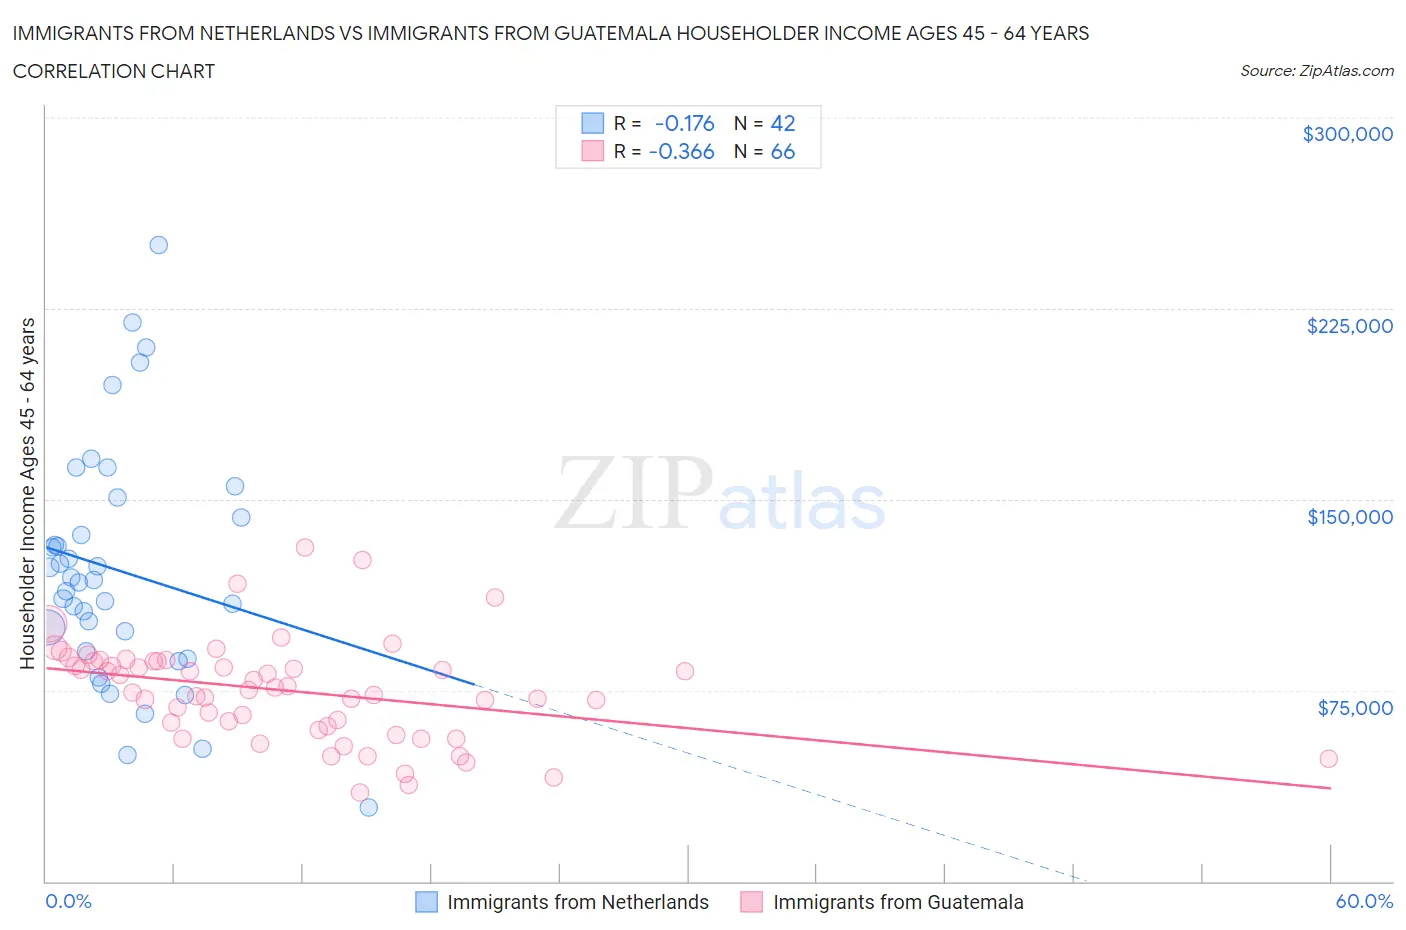 Immigrants from Netherlands vs Immigrants from Guatemala Householder Income Ages 45 - 64 years